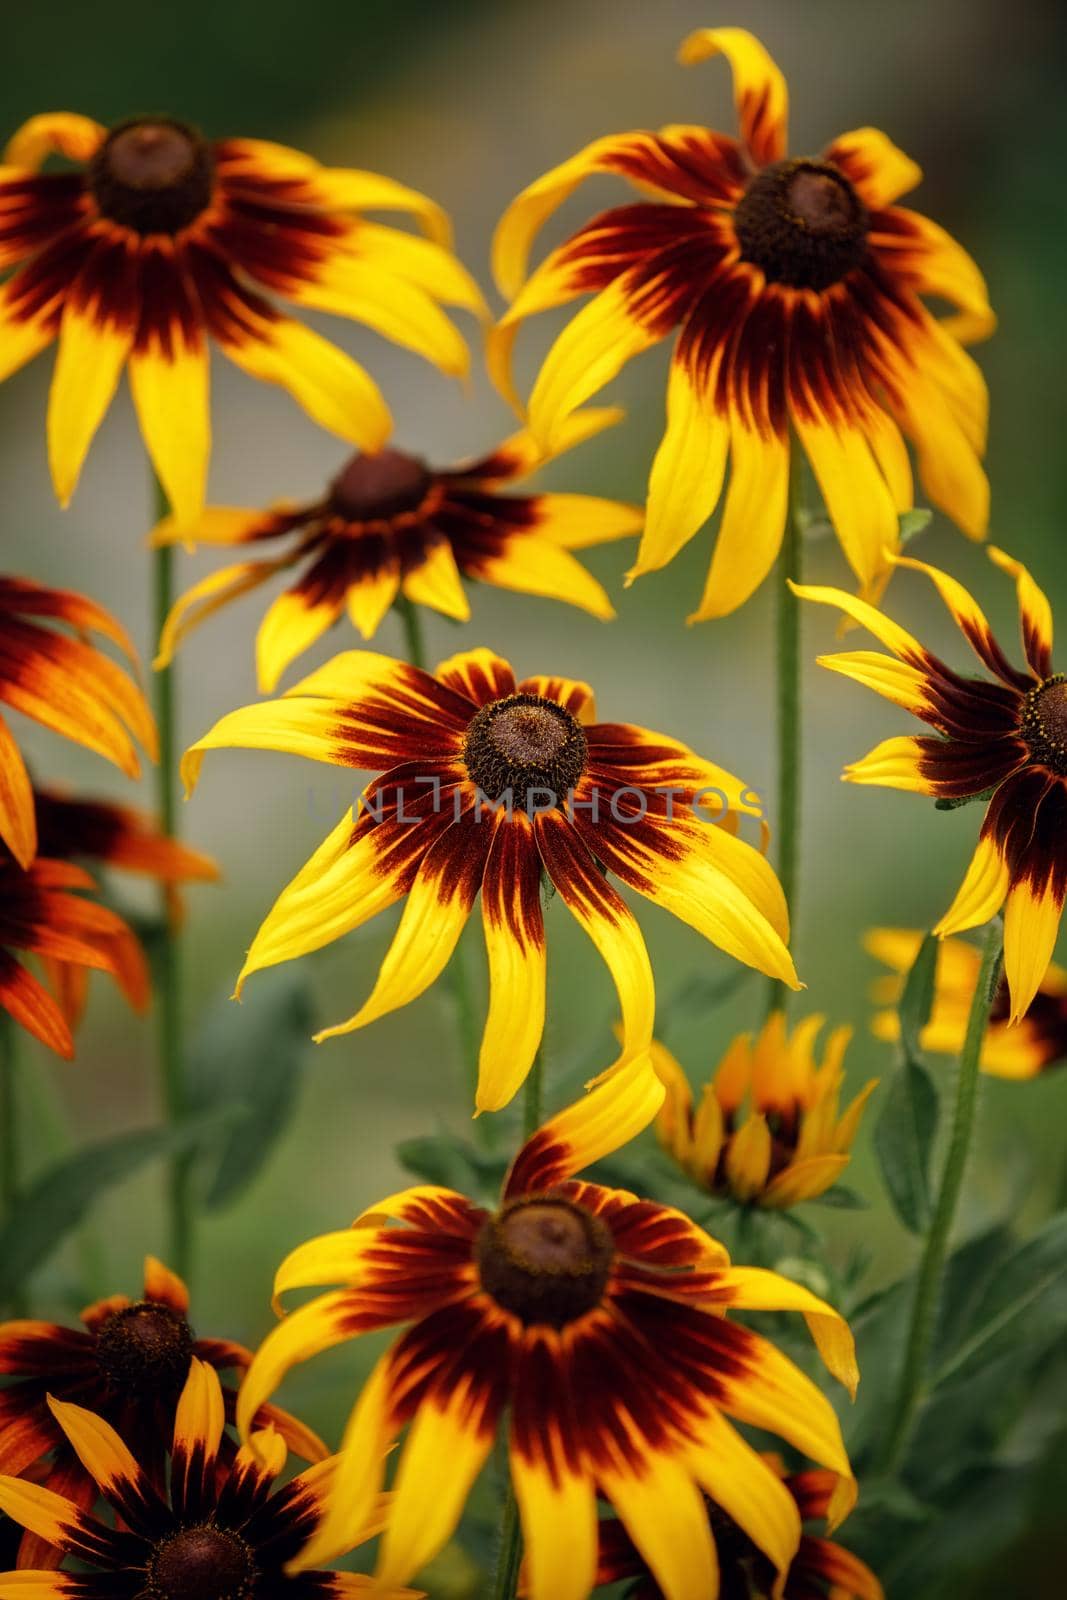 Flowers of yellow rudbeckia. A lot of blooming flowers of yellow rudbeckia (black-eyed susan) flower garden in the summer garden. Gift Card.